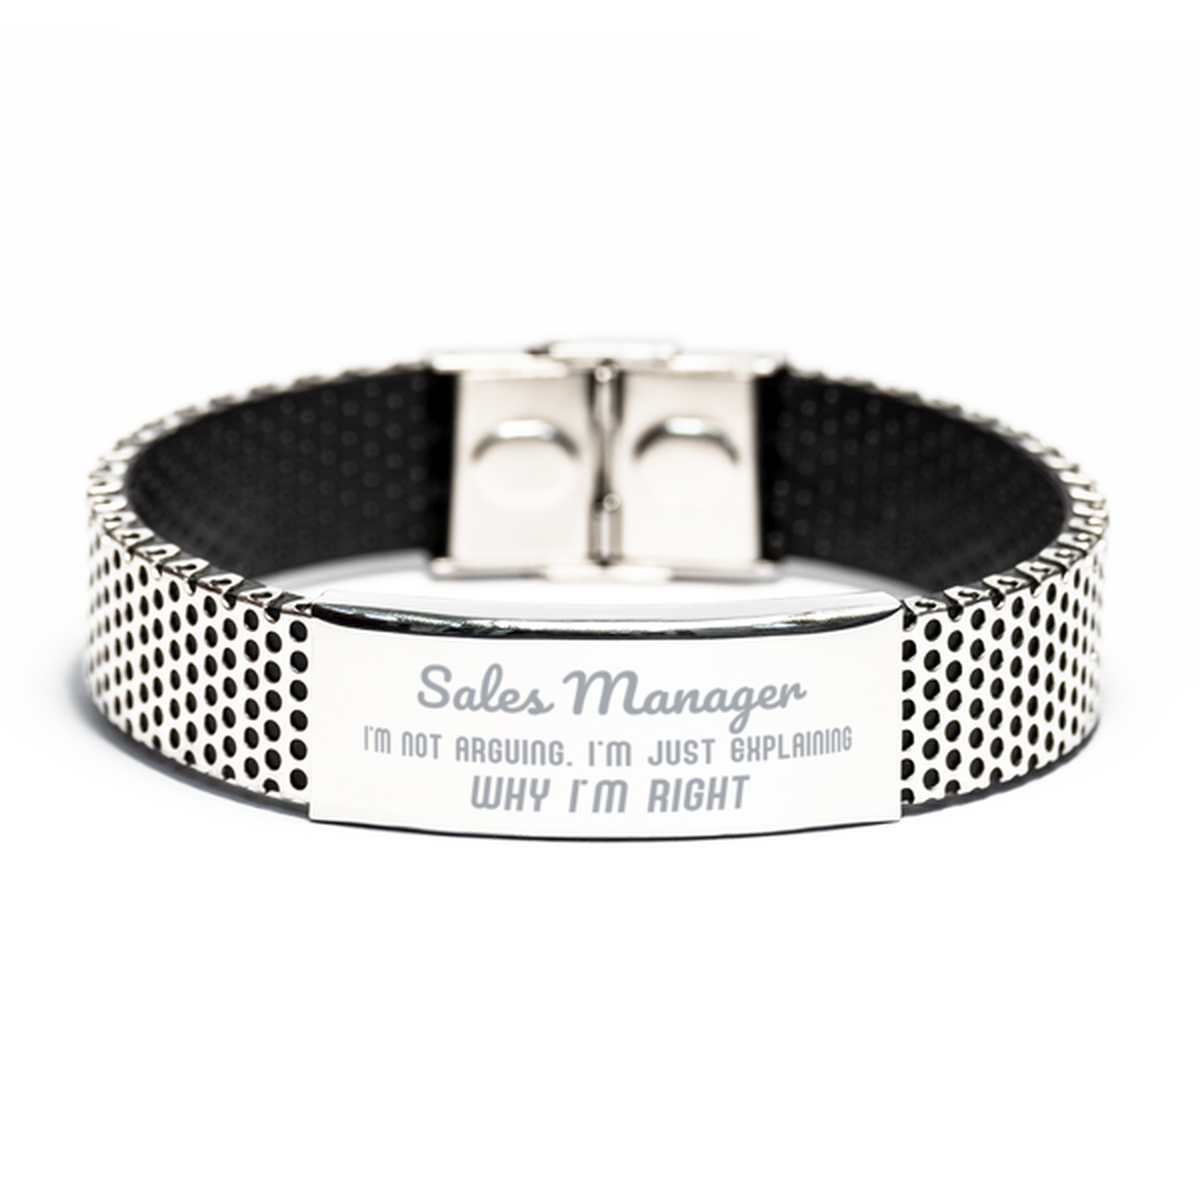 Sales Manager I'm not Arguing. I'm Just Explaining Why I'm RIGHT Stainless Steel Bracelet, Funny Saying Quote Sales Manager Gifts For Sales Manager Graduation Birthday Christmas Gifts for Men Women Coworker